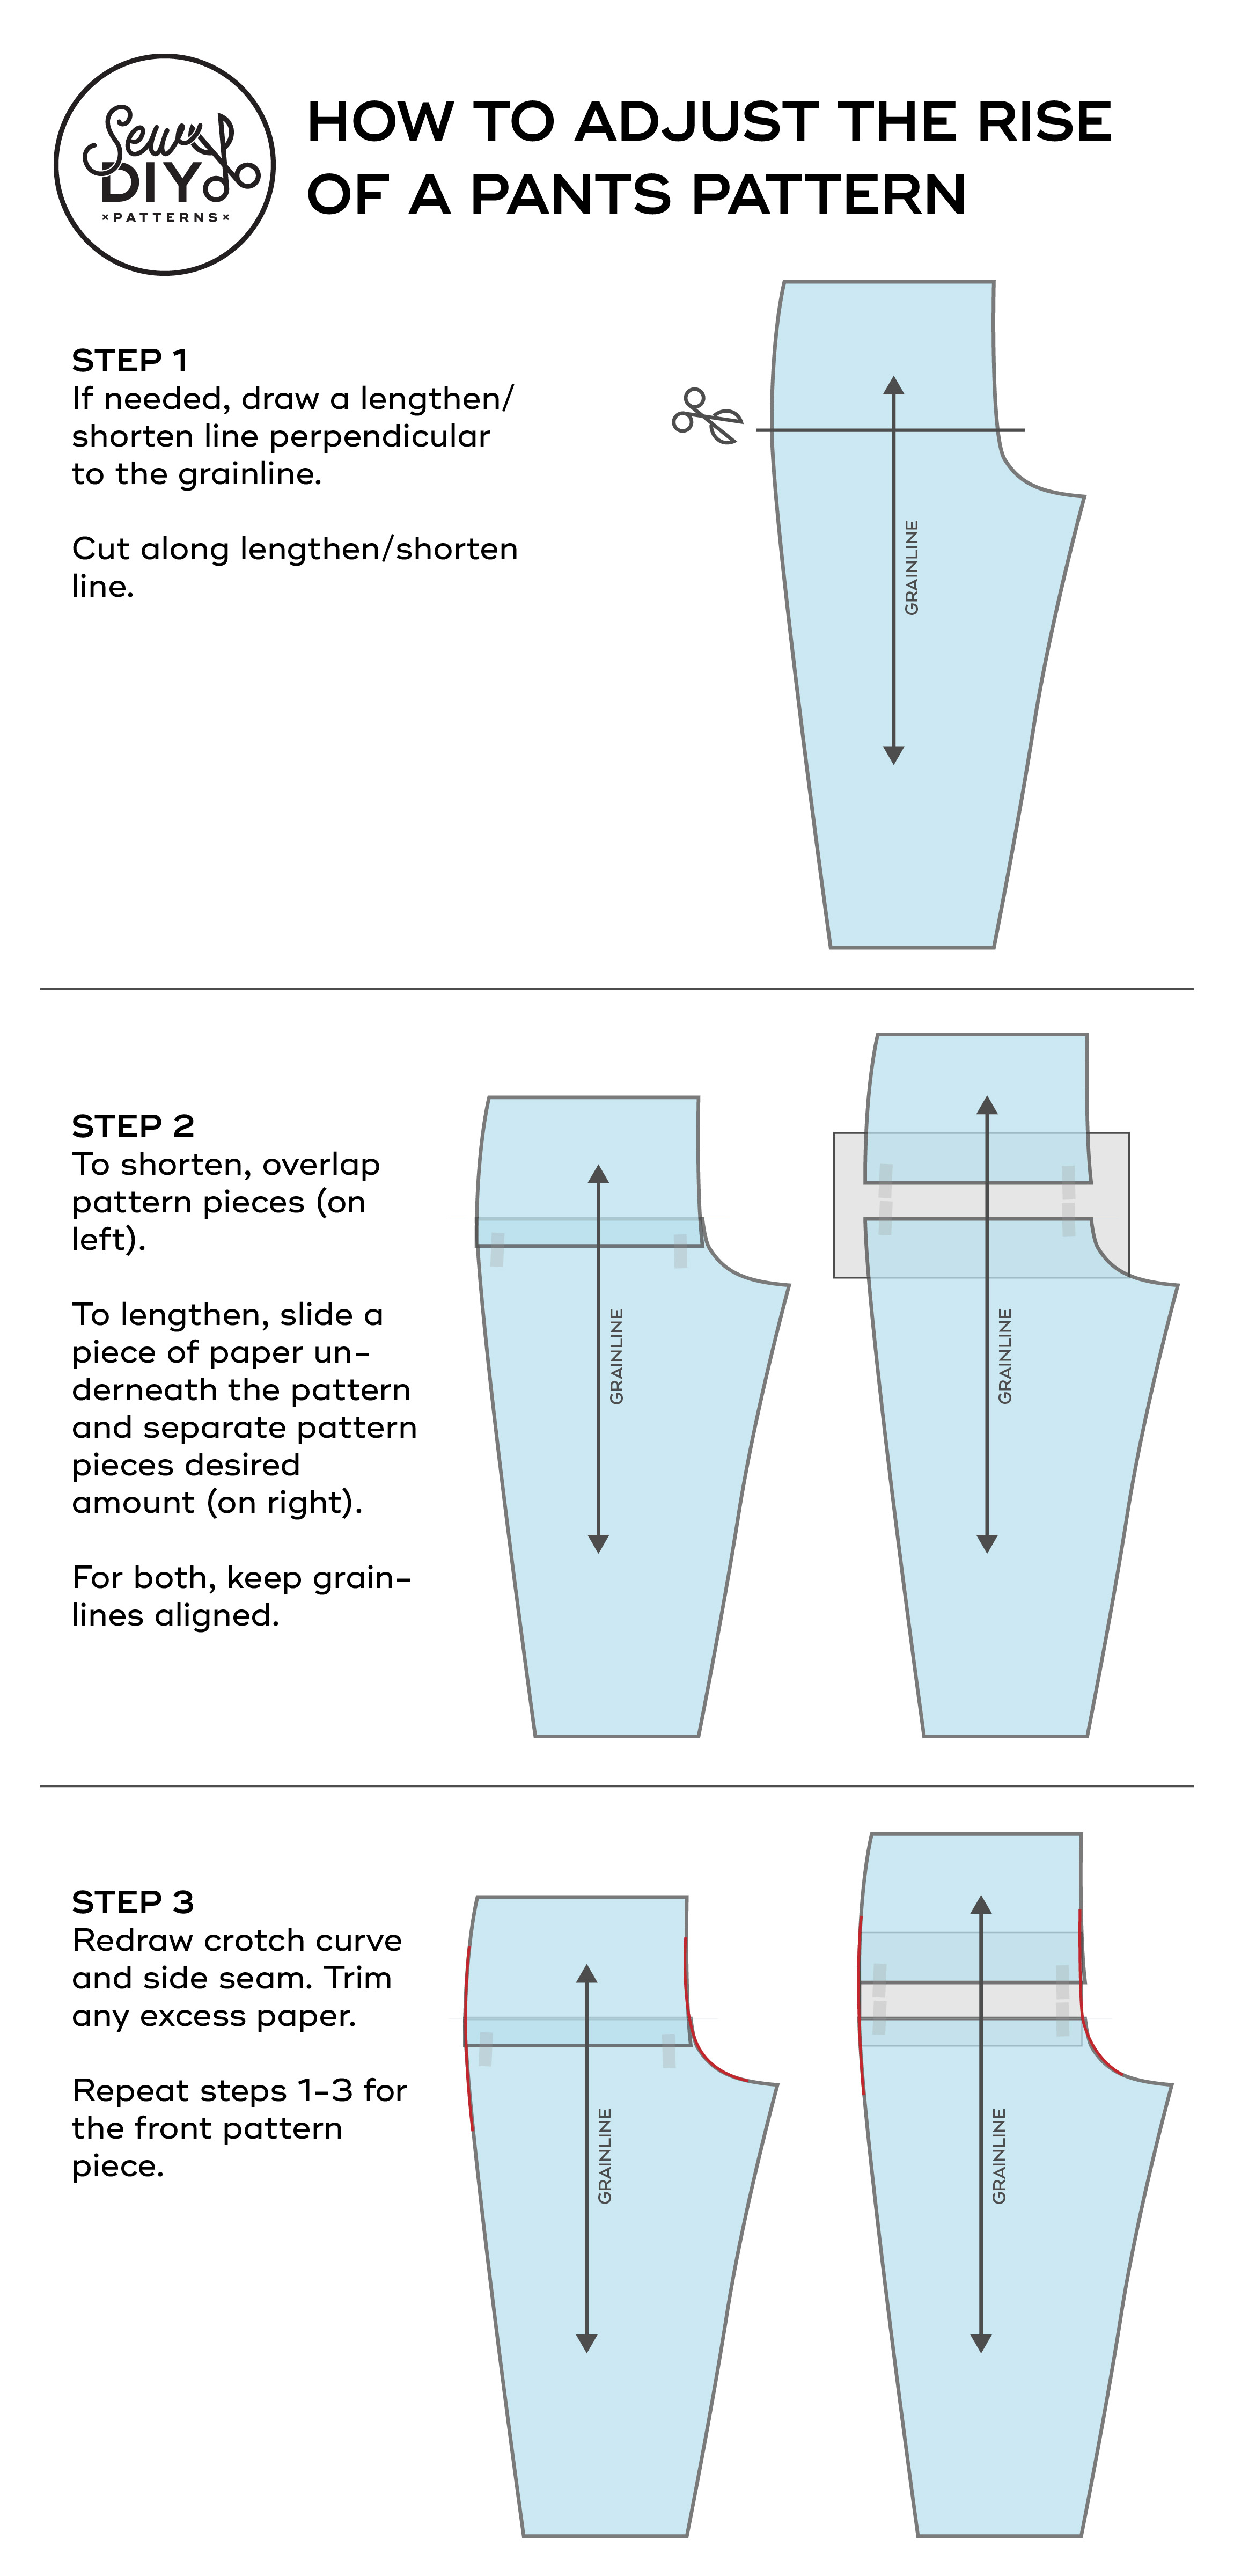 How to lengthen or shorten the rise of a pants pattern — Sew DIY